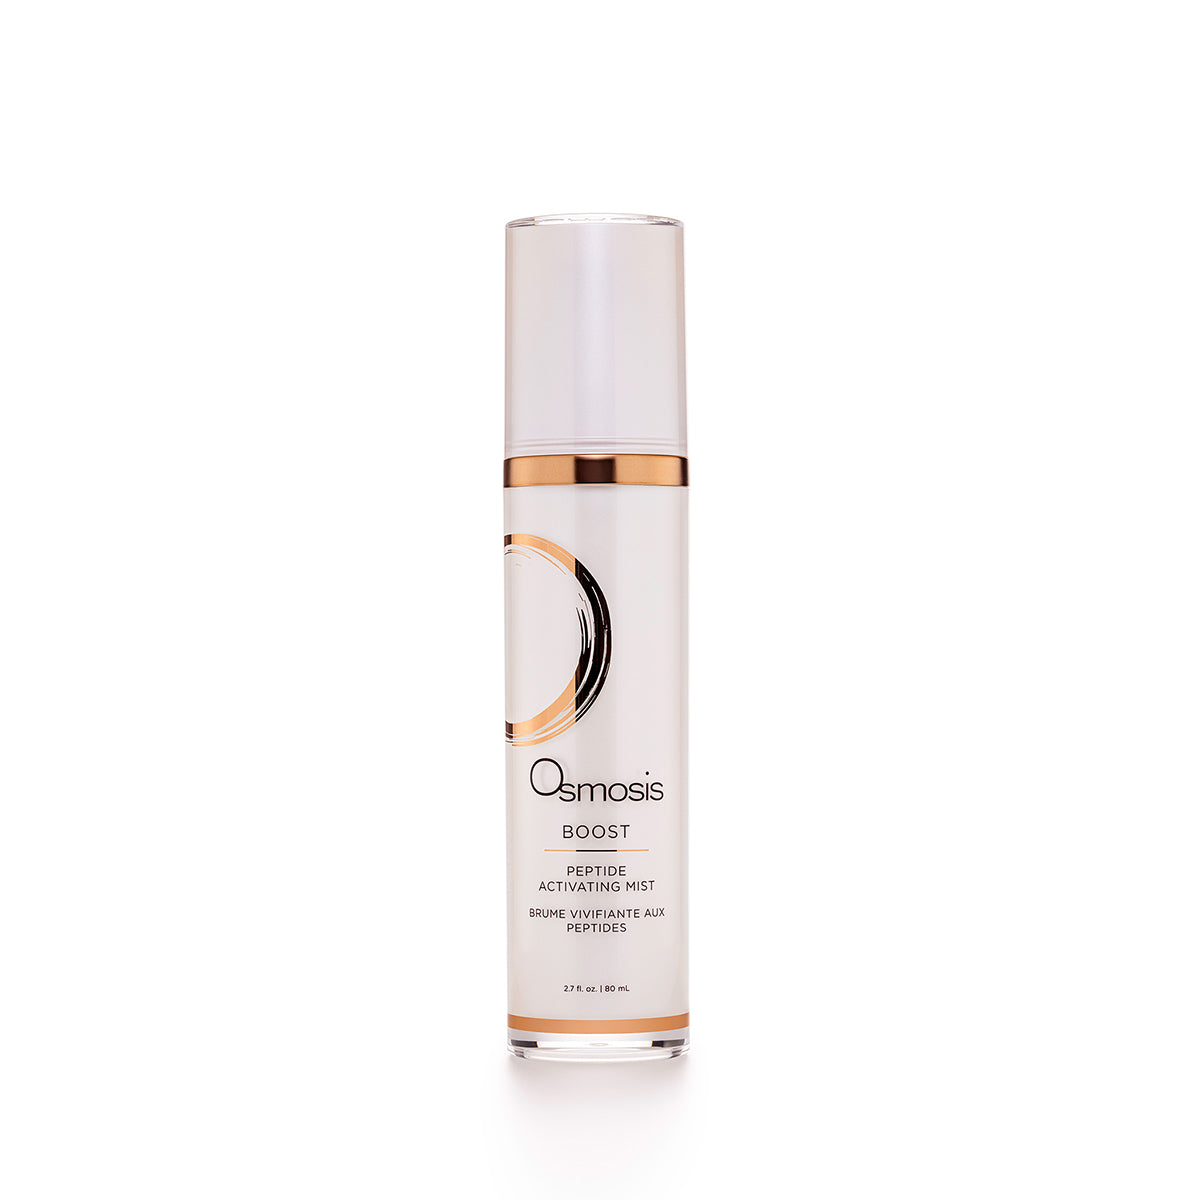 Osmosis Skincare Boost Mist is a Peptide-infused, vitamin-enriched toner that leaves the skin lightly hydrated.